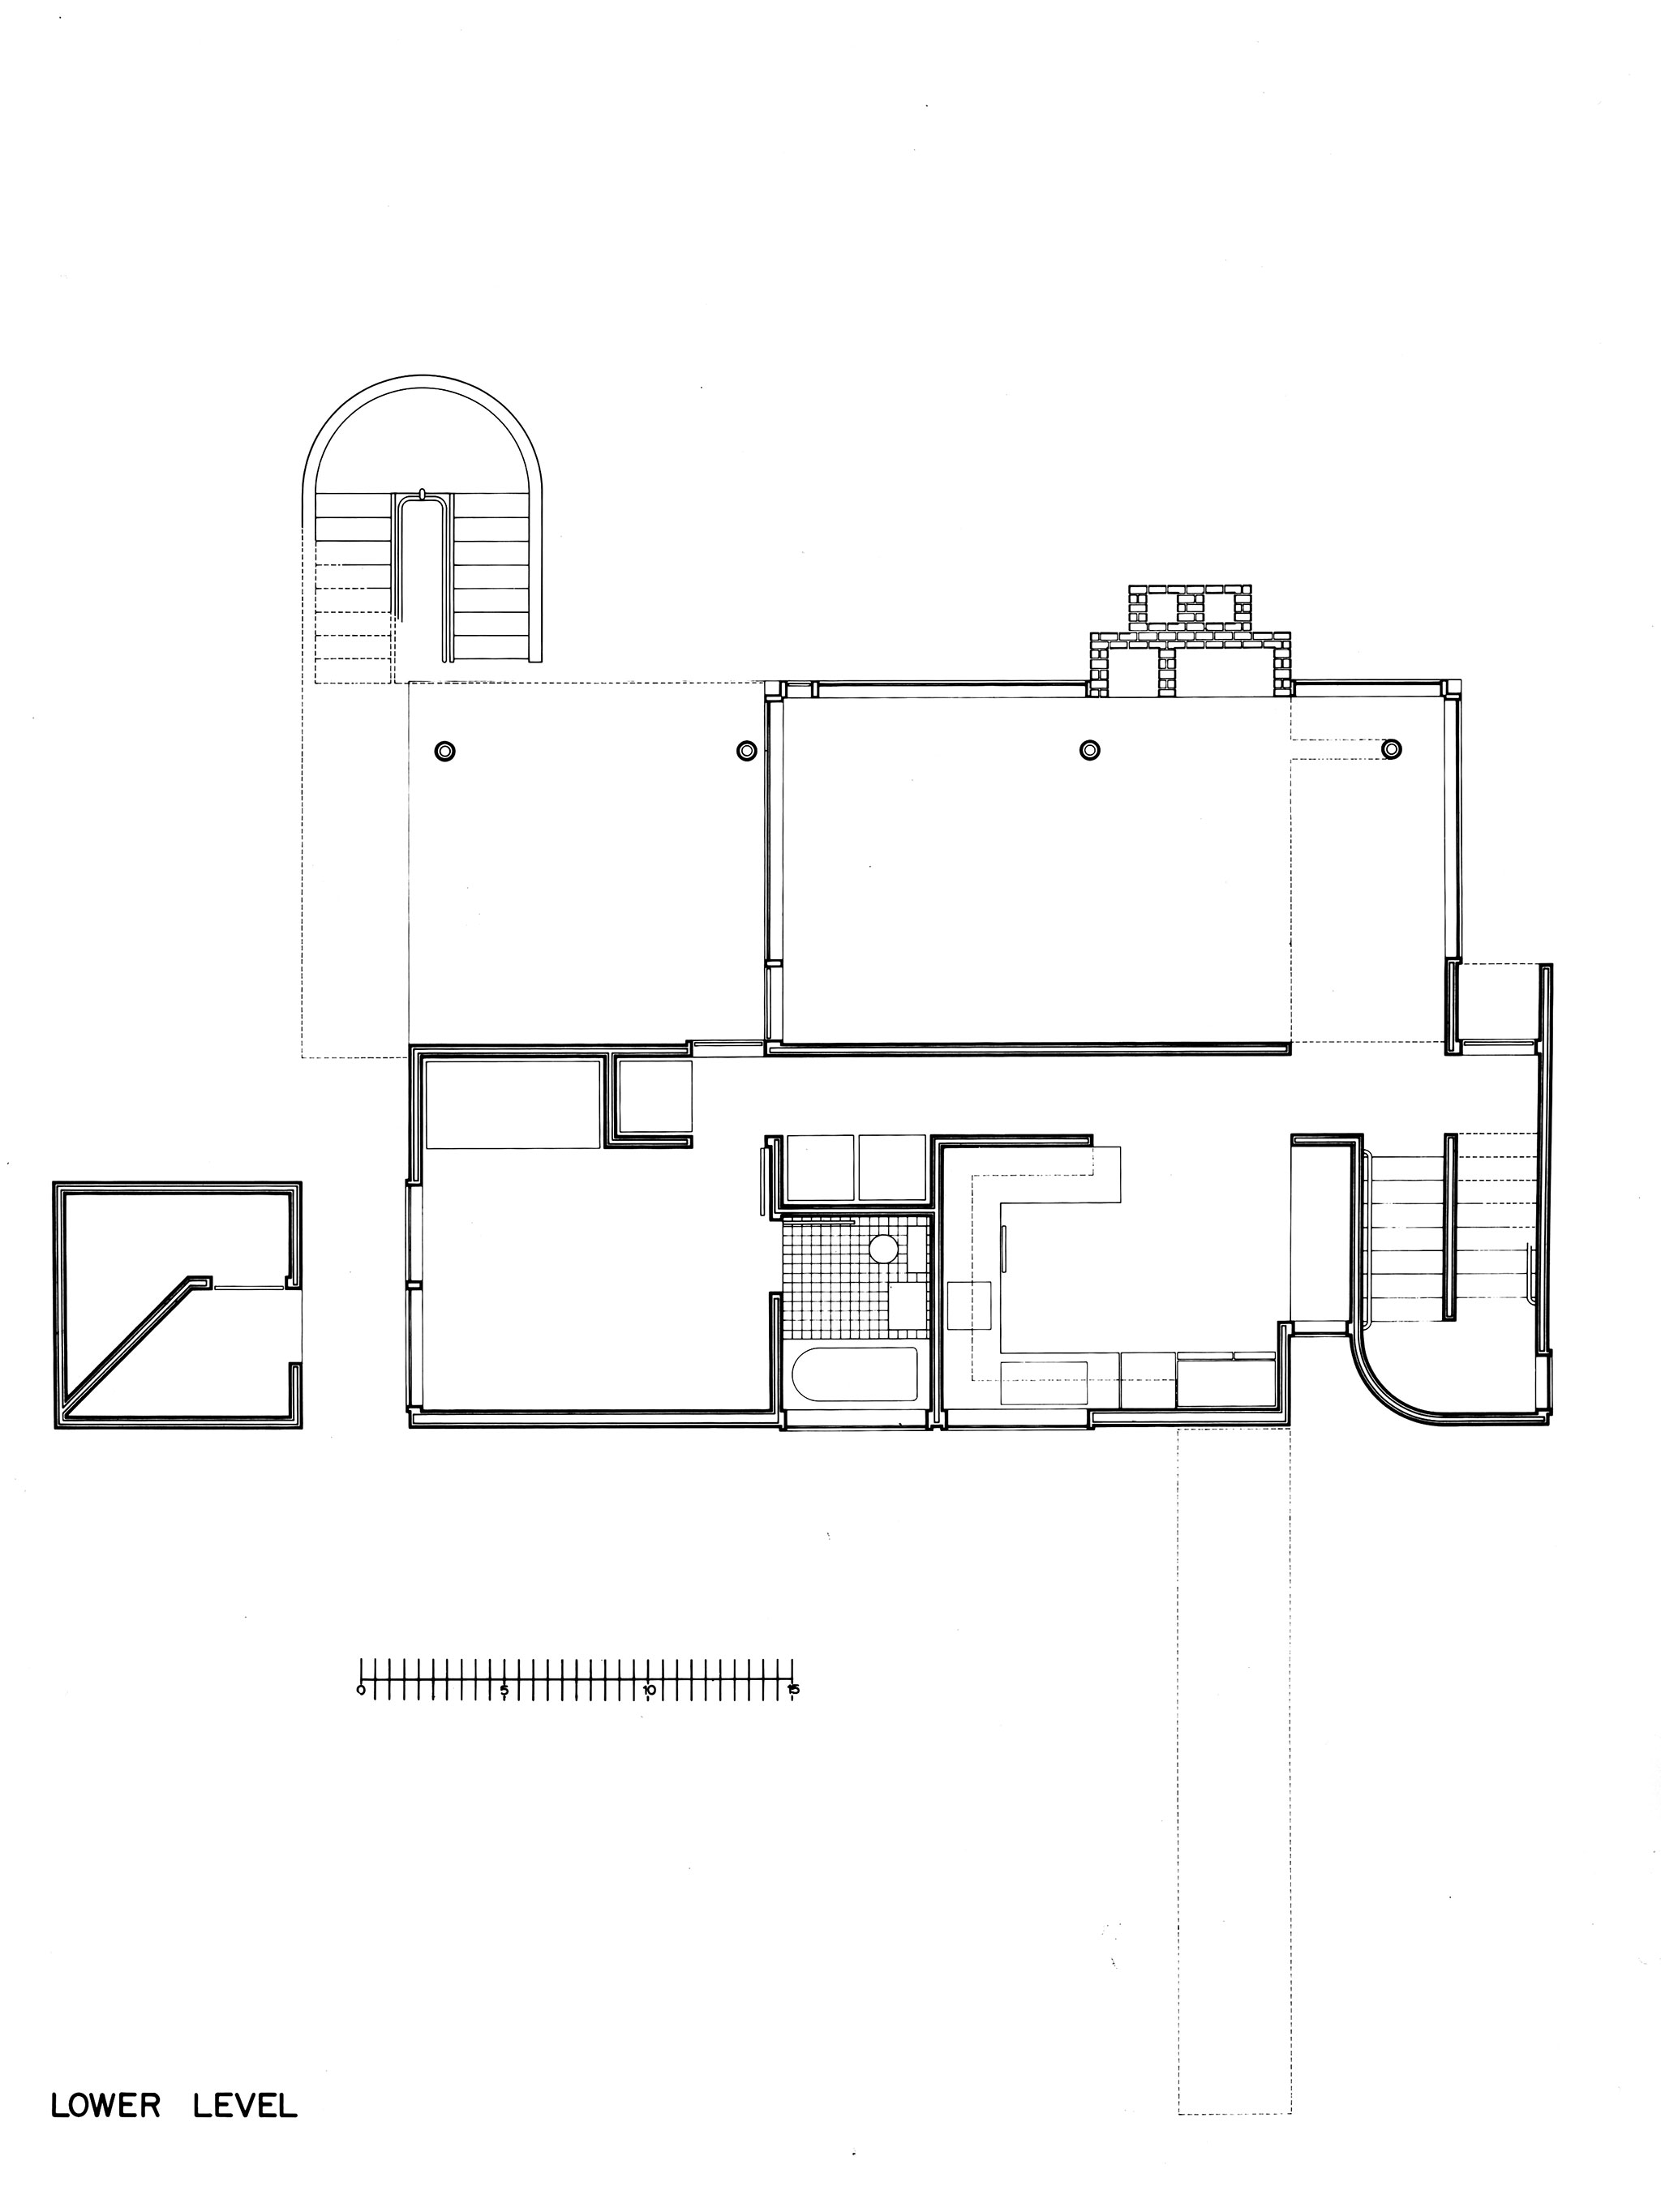 The Smith House by Richard Meier, celebrates 50 years with